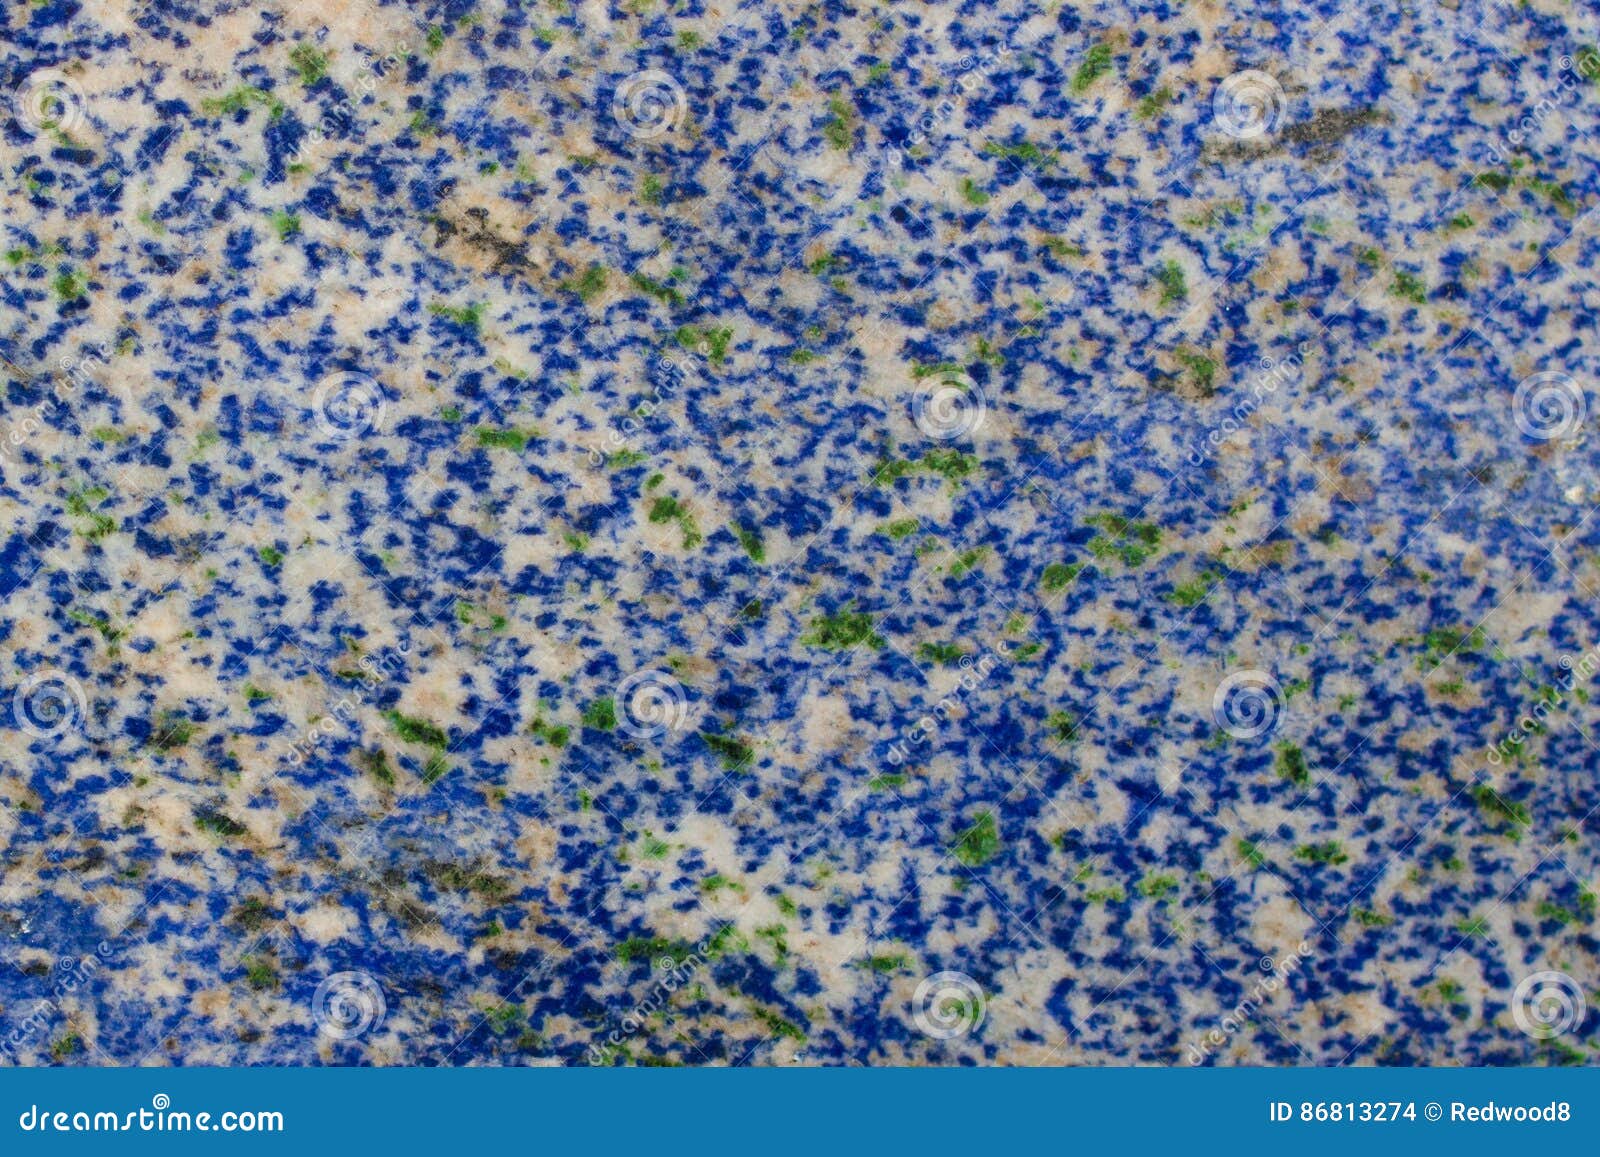 Bright Blue Speckled Granite Stock Photo Image of background, shades 86813274